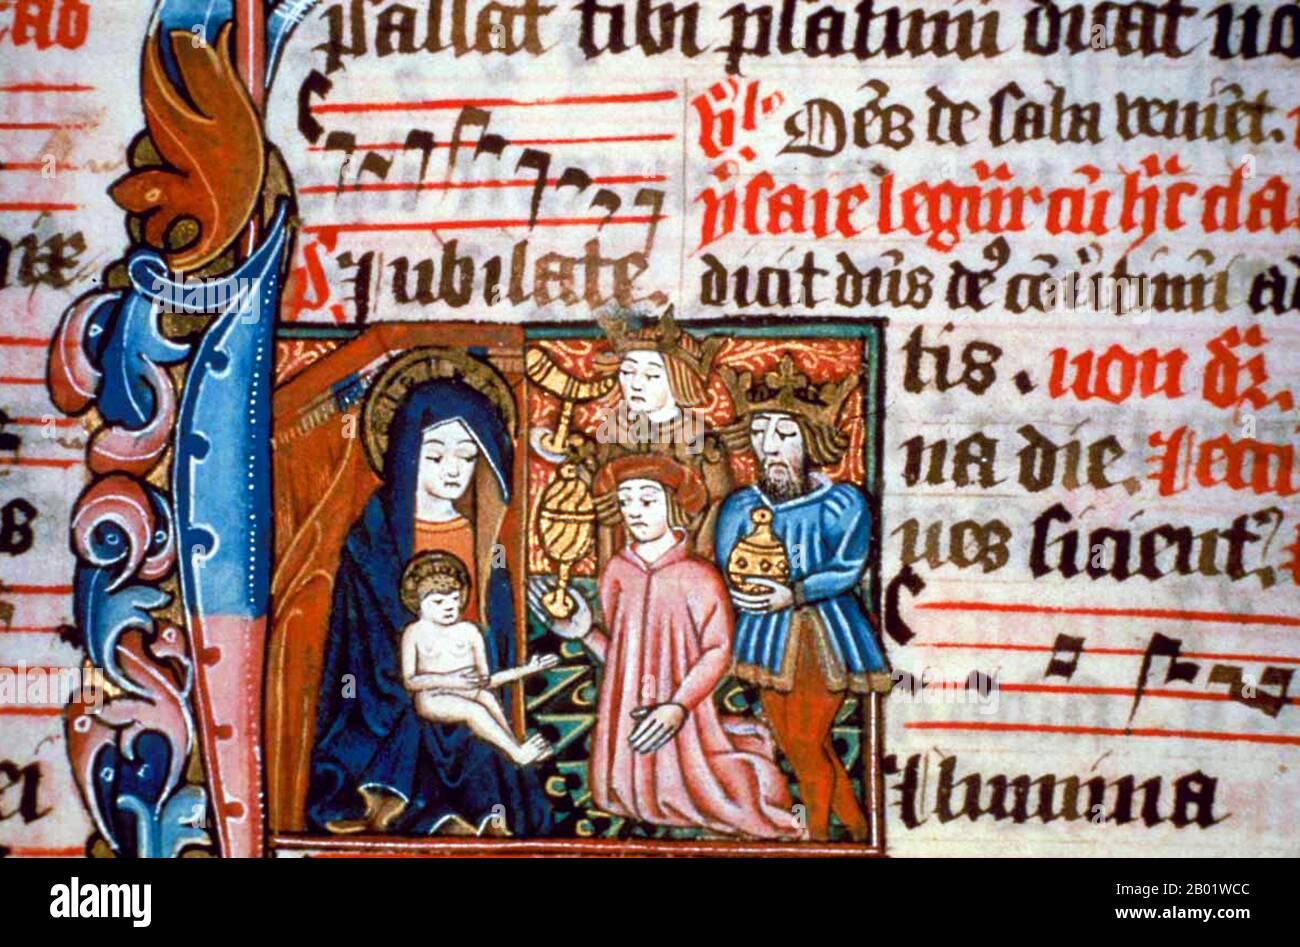 England: 'The Adoration of the Magi', Ranworth Antiphonal/Antiphoner, Norwich, c. 1460-1480 CE.  The Magi, in royal or aristocratic dress, come to adore Christ child and to bring gifts of frankincense, gold and myrrh.  From the Ranworth Antiphonal of c.1460-1480 - its professional but provincial decoration suggest it was made in the Norwich area for use in the Norwich diocese (at Ranworth church, Norfolk, by 1505). Stock Photo